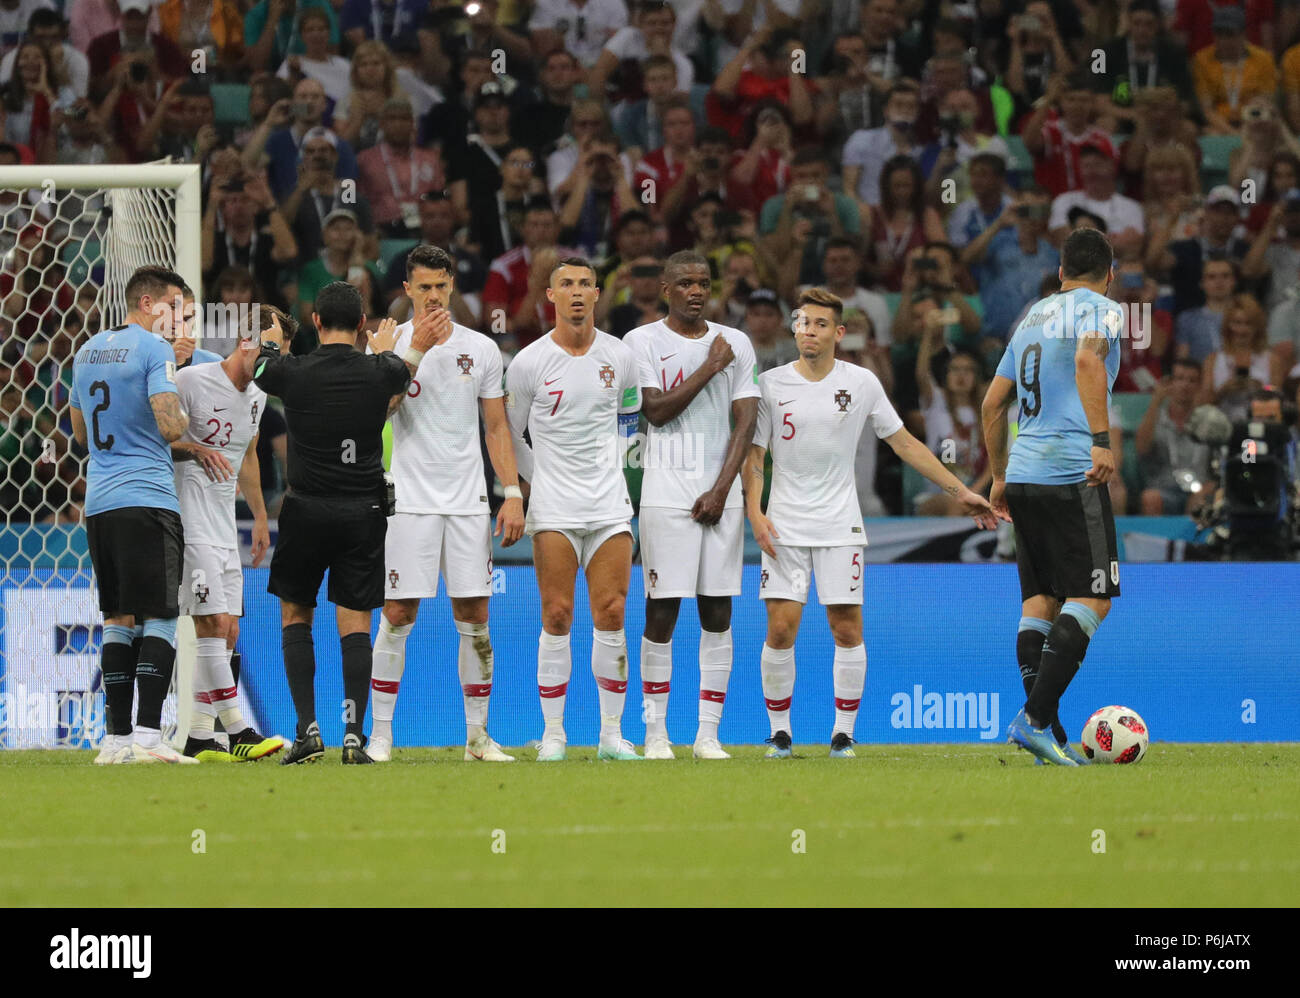 Sochi, Russia. 30th June, 2018. Fußball: Football World Cup, Uruguay vs Portugal at the Fisht Stadium. Luis Suarez (r) of Uruguay taking a freekick, in front of (r-l) Raphael Guerreiro of Portugal, William Carvalho of Portugal, Cristiano Ronaldo of Portugal, Jose Fonte of Portugal. Credit: Christian Charisius/dpa/Alamy Live News Stock Photo